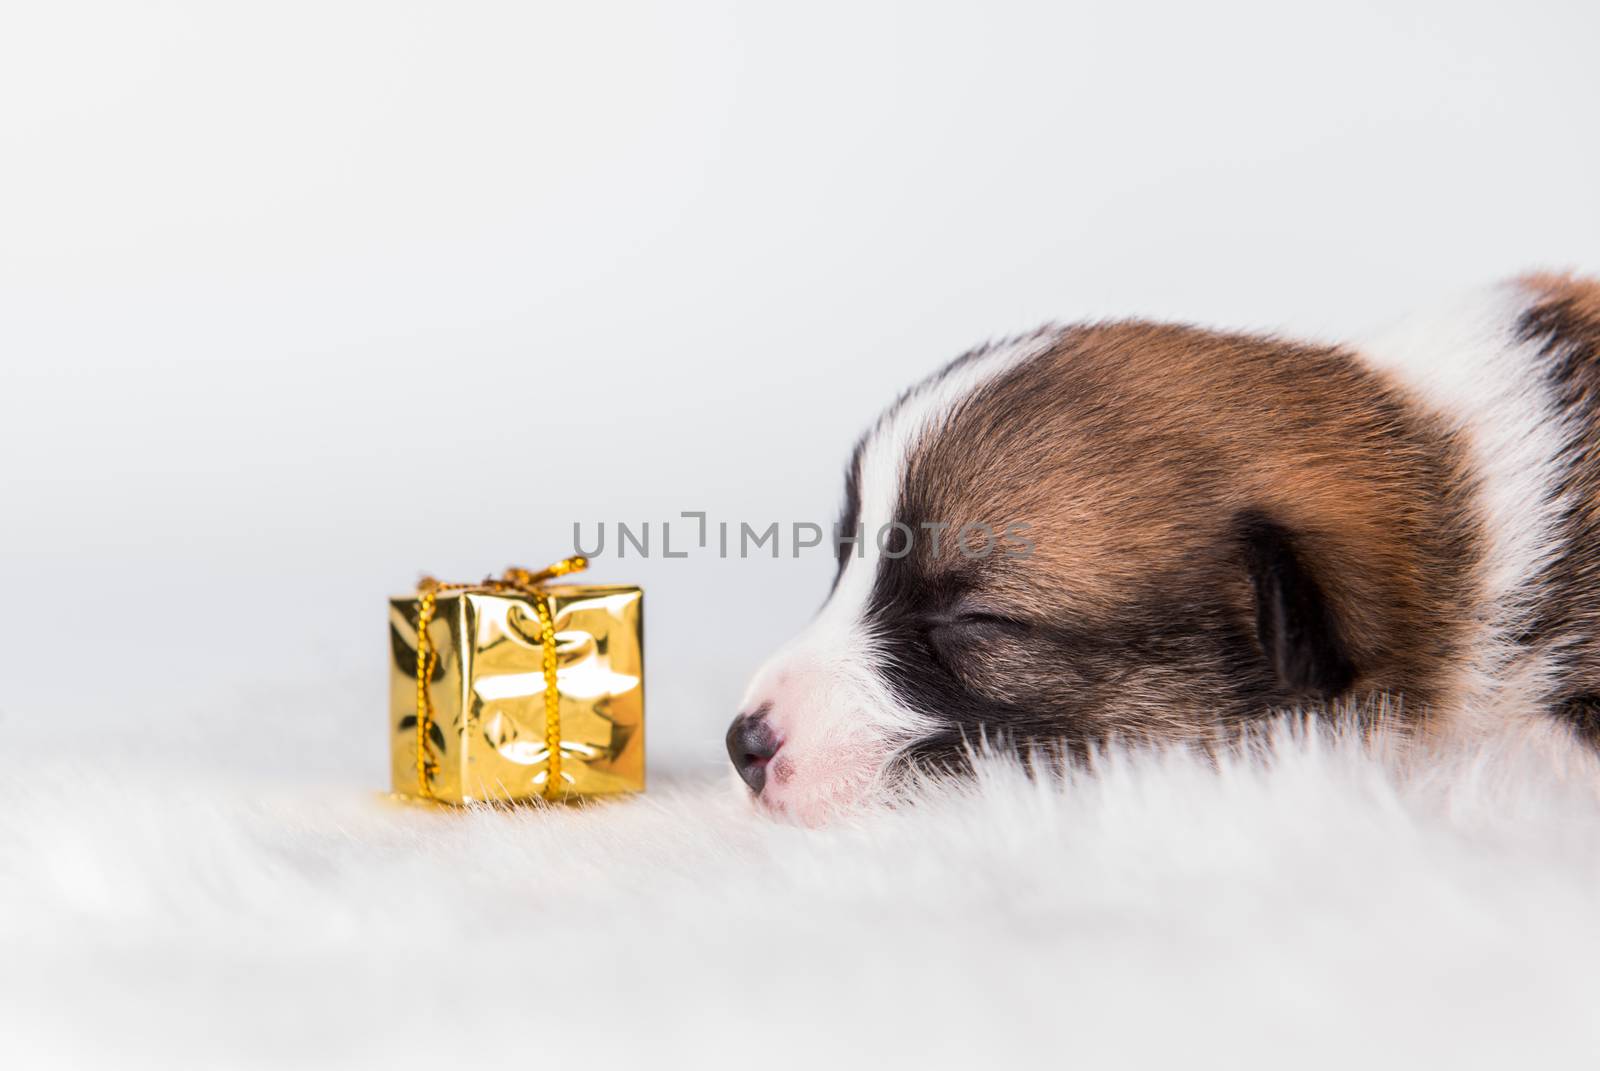 Funny small Pembroke Welsh Corgi puppy dog with gift isolated on white background for Christmas or other holidays card